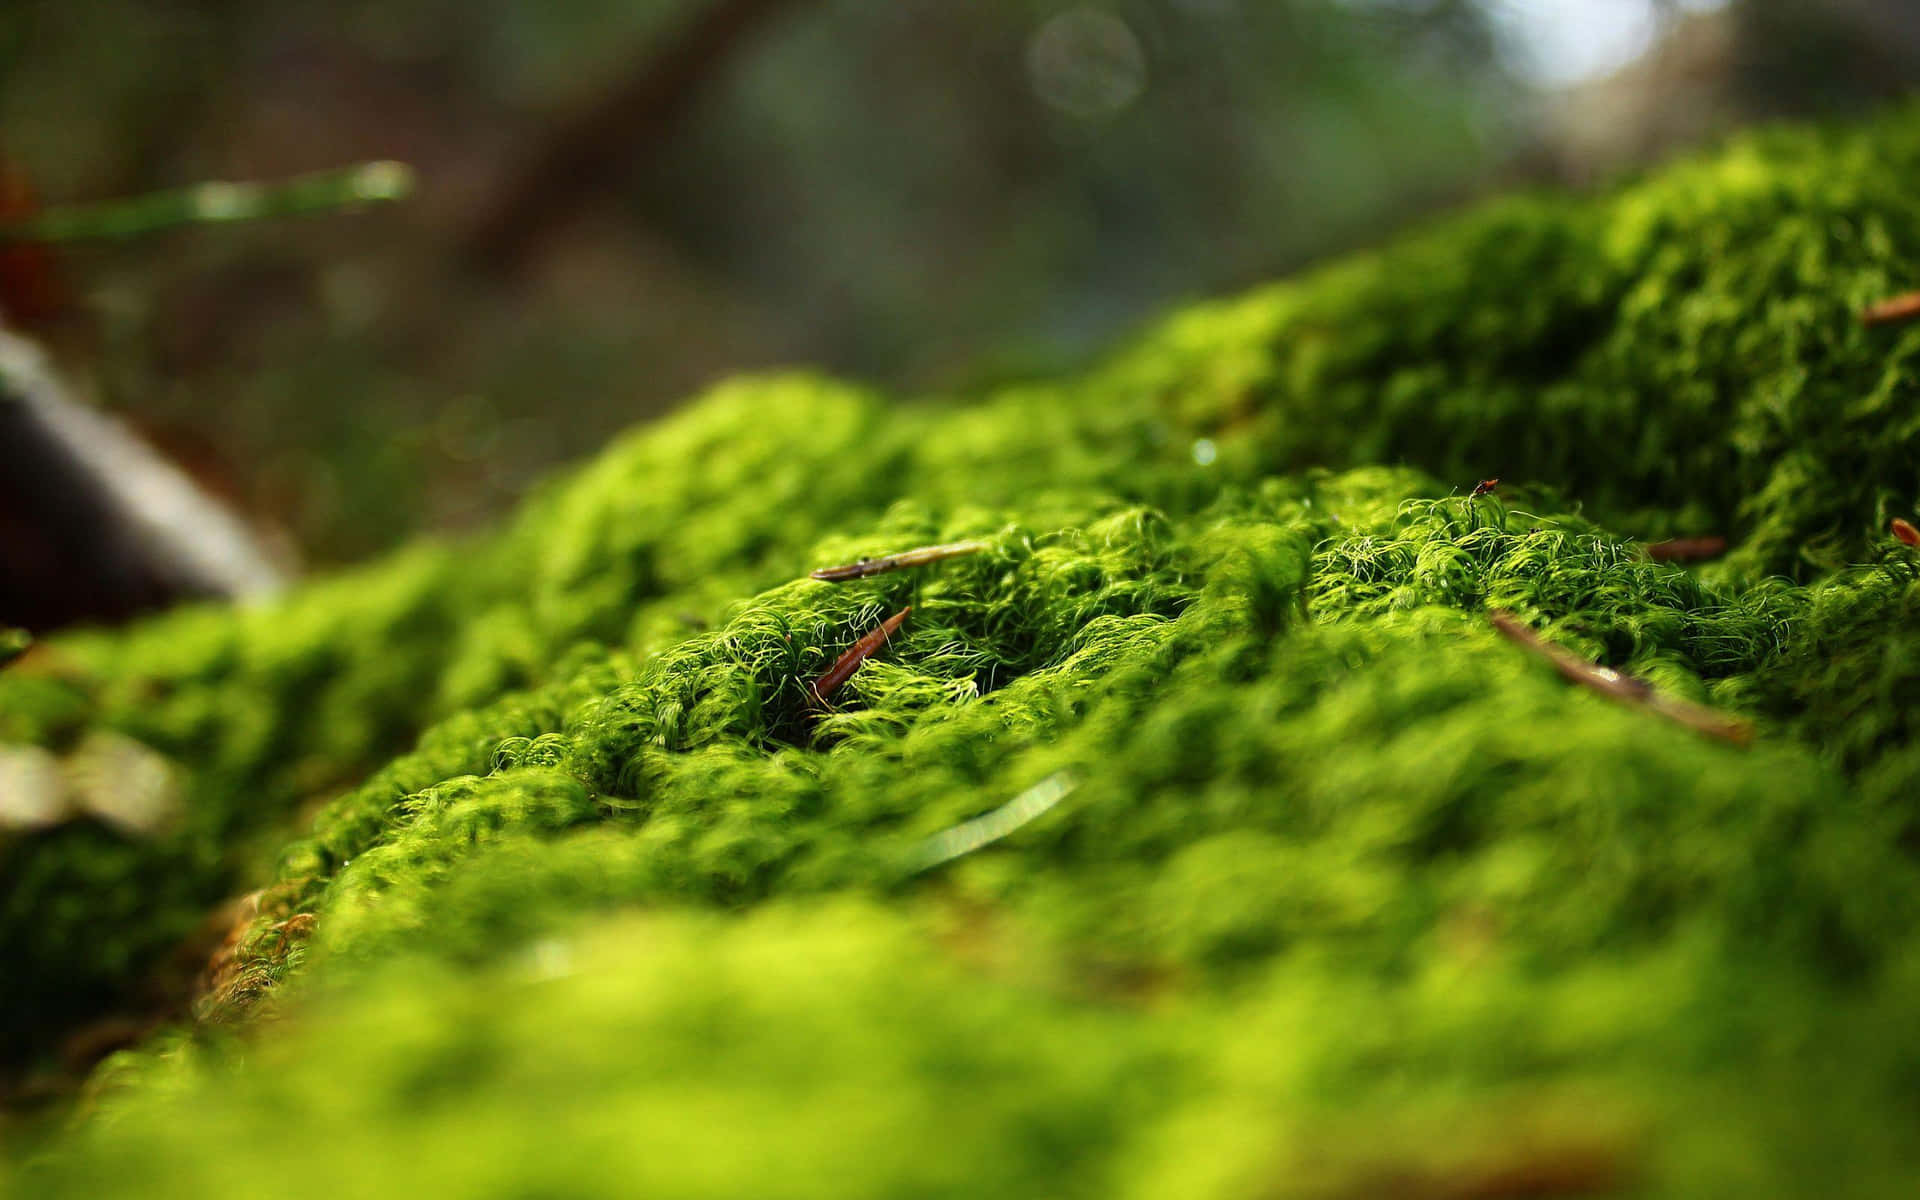 A carpet of vivid green moss covering a forest floor